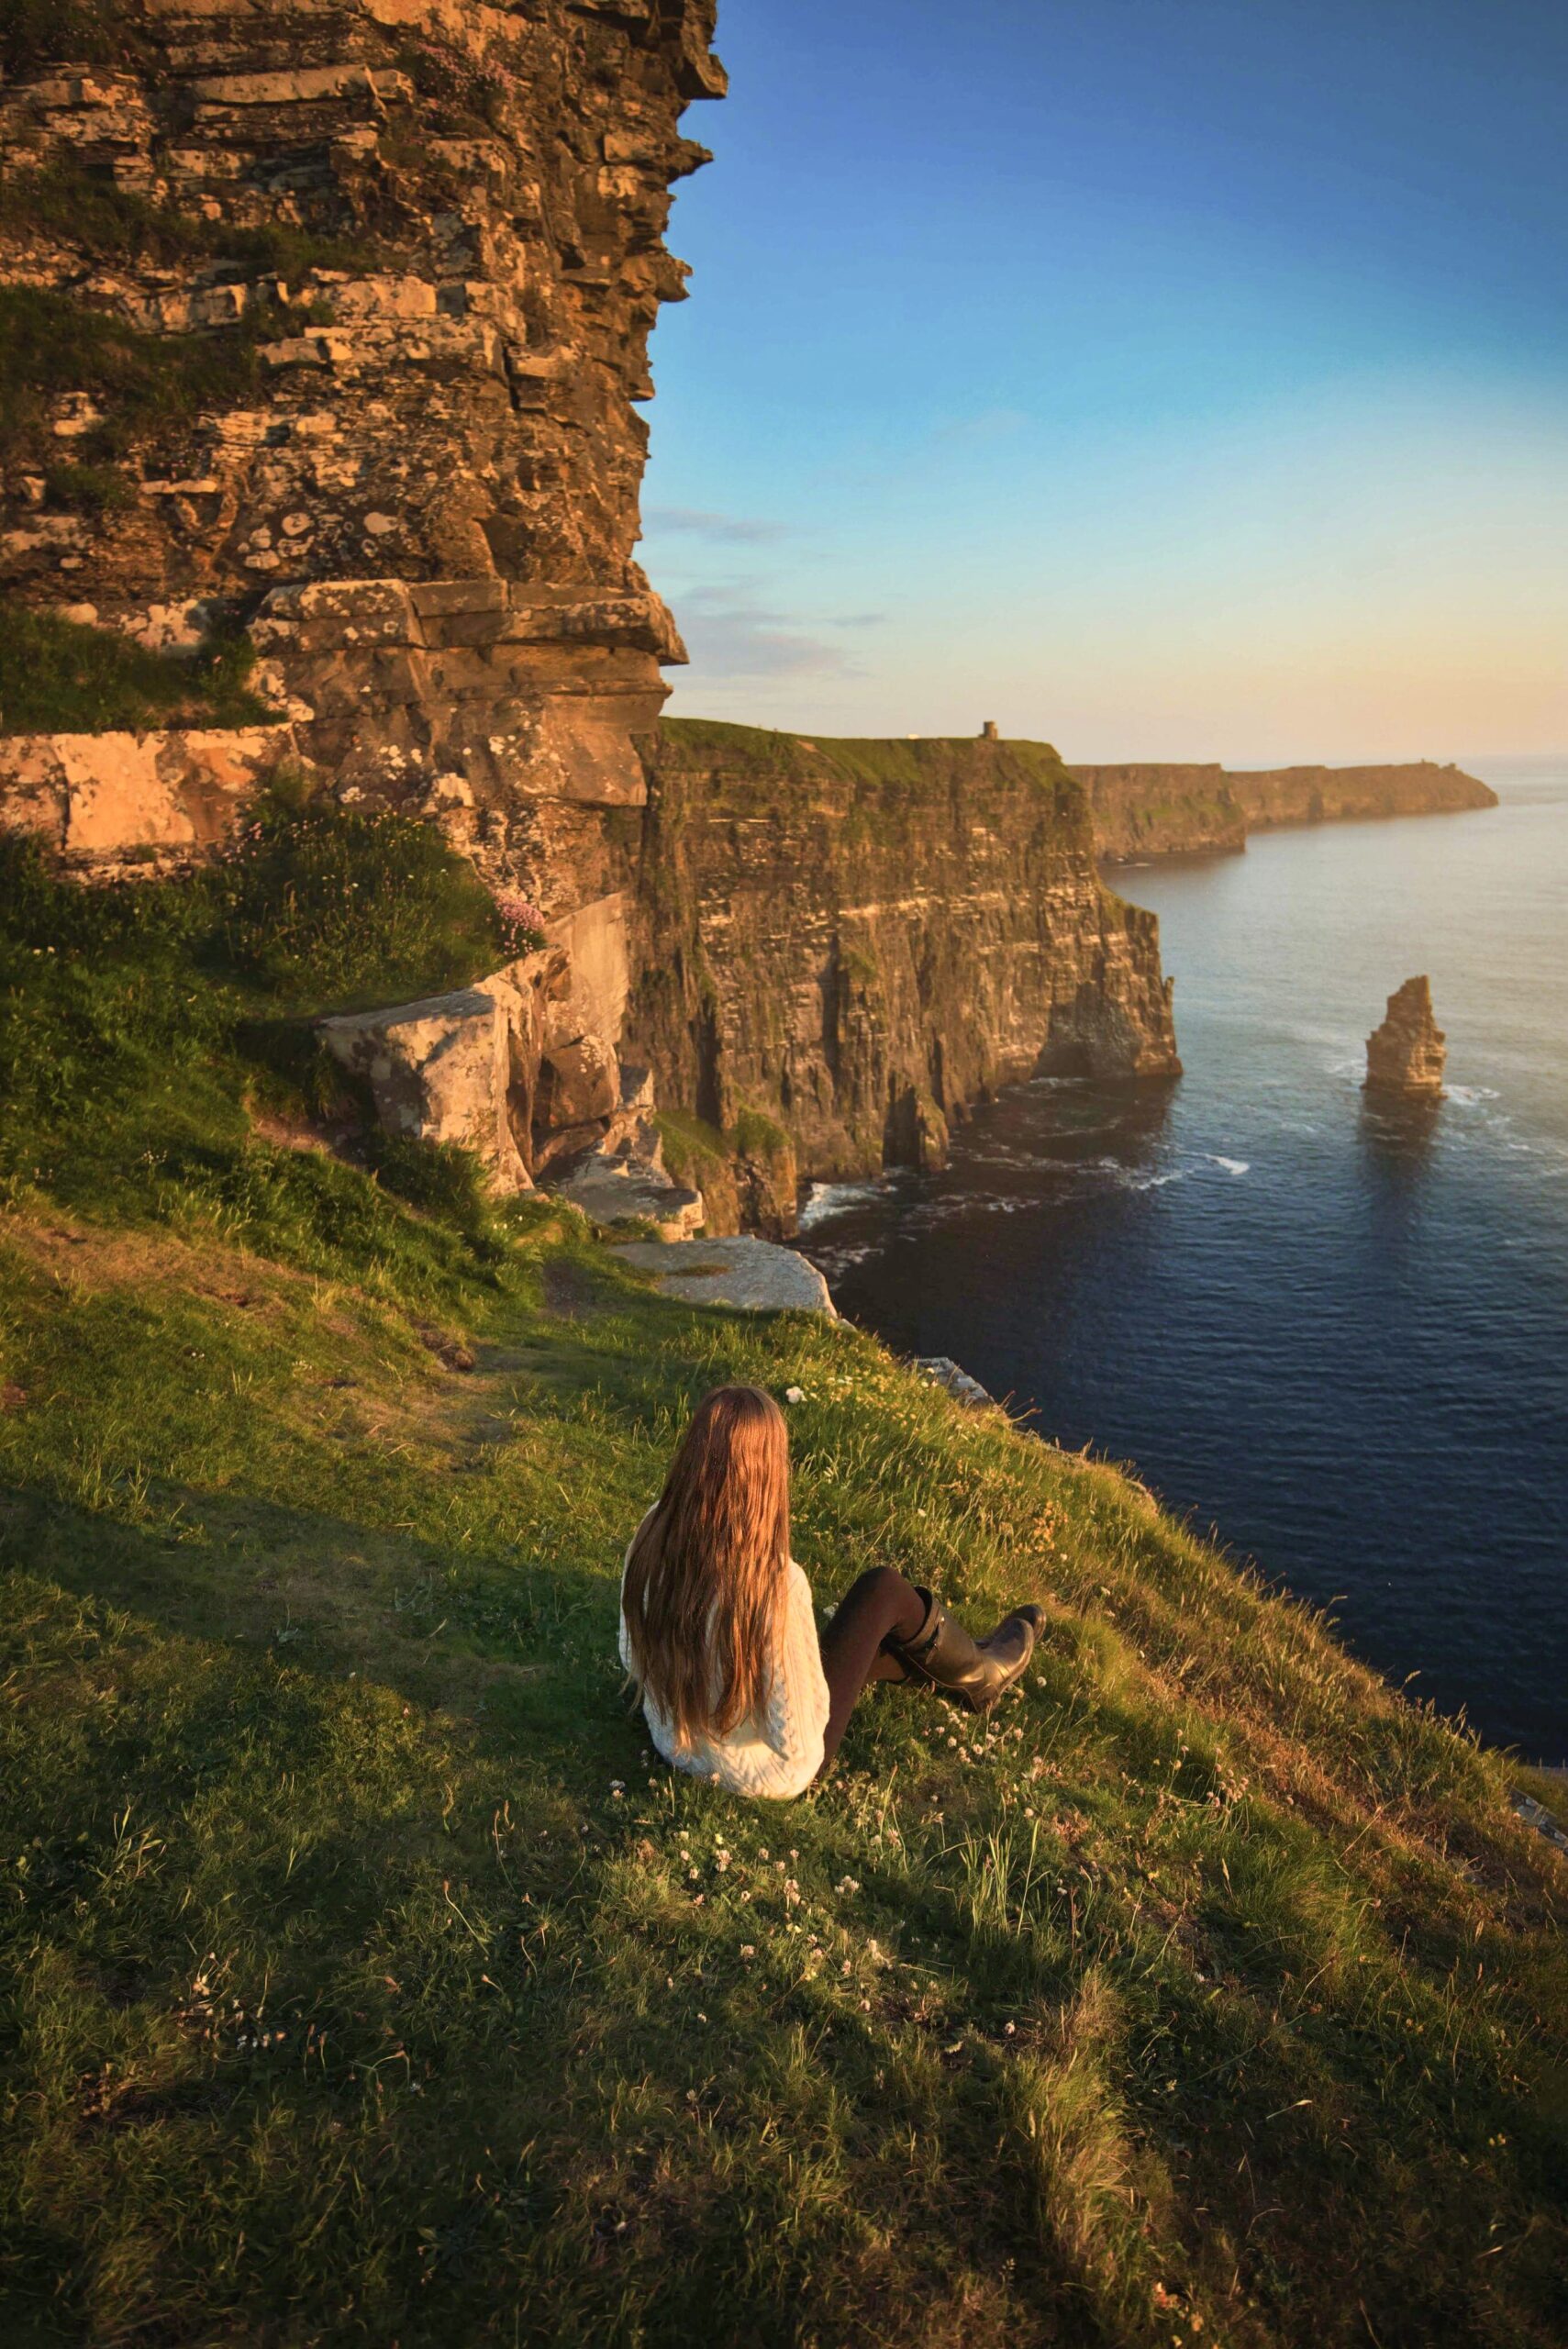 Woman sitting in grass overlooking the epic Cliffs of Moher at sunset.